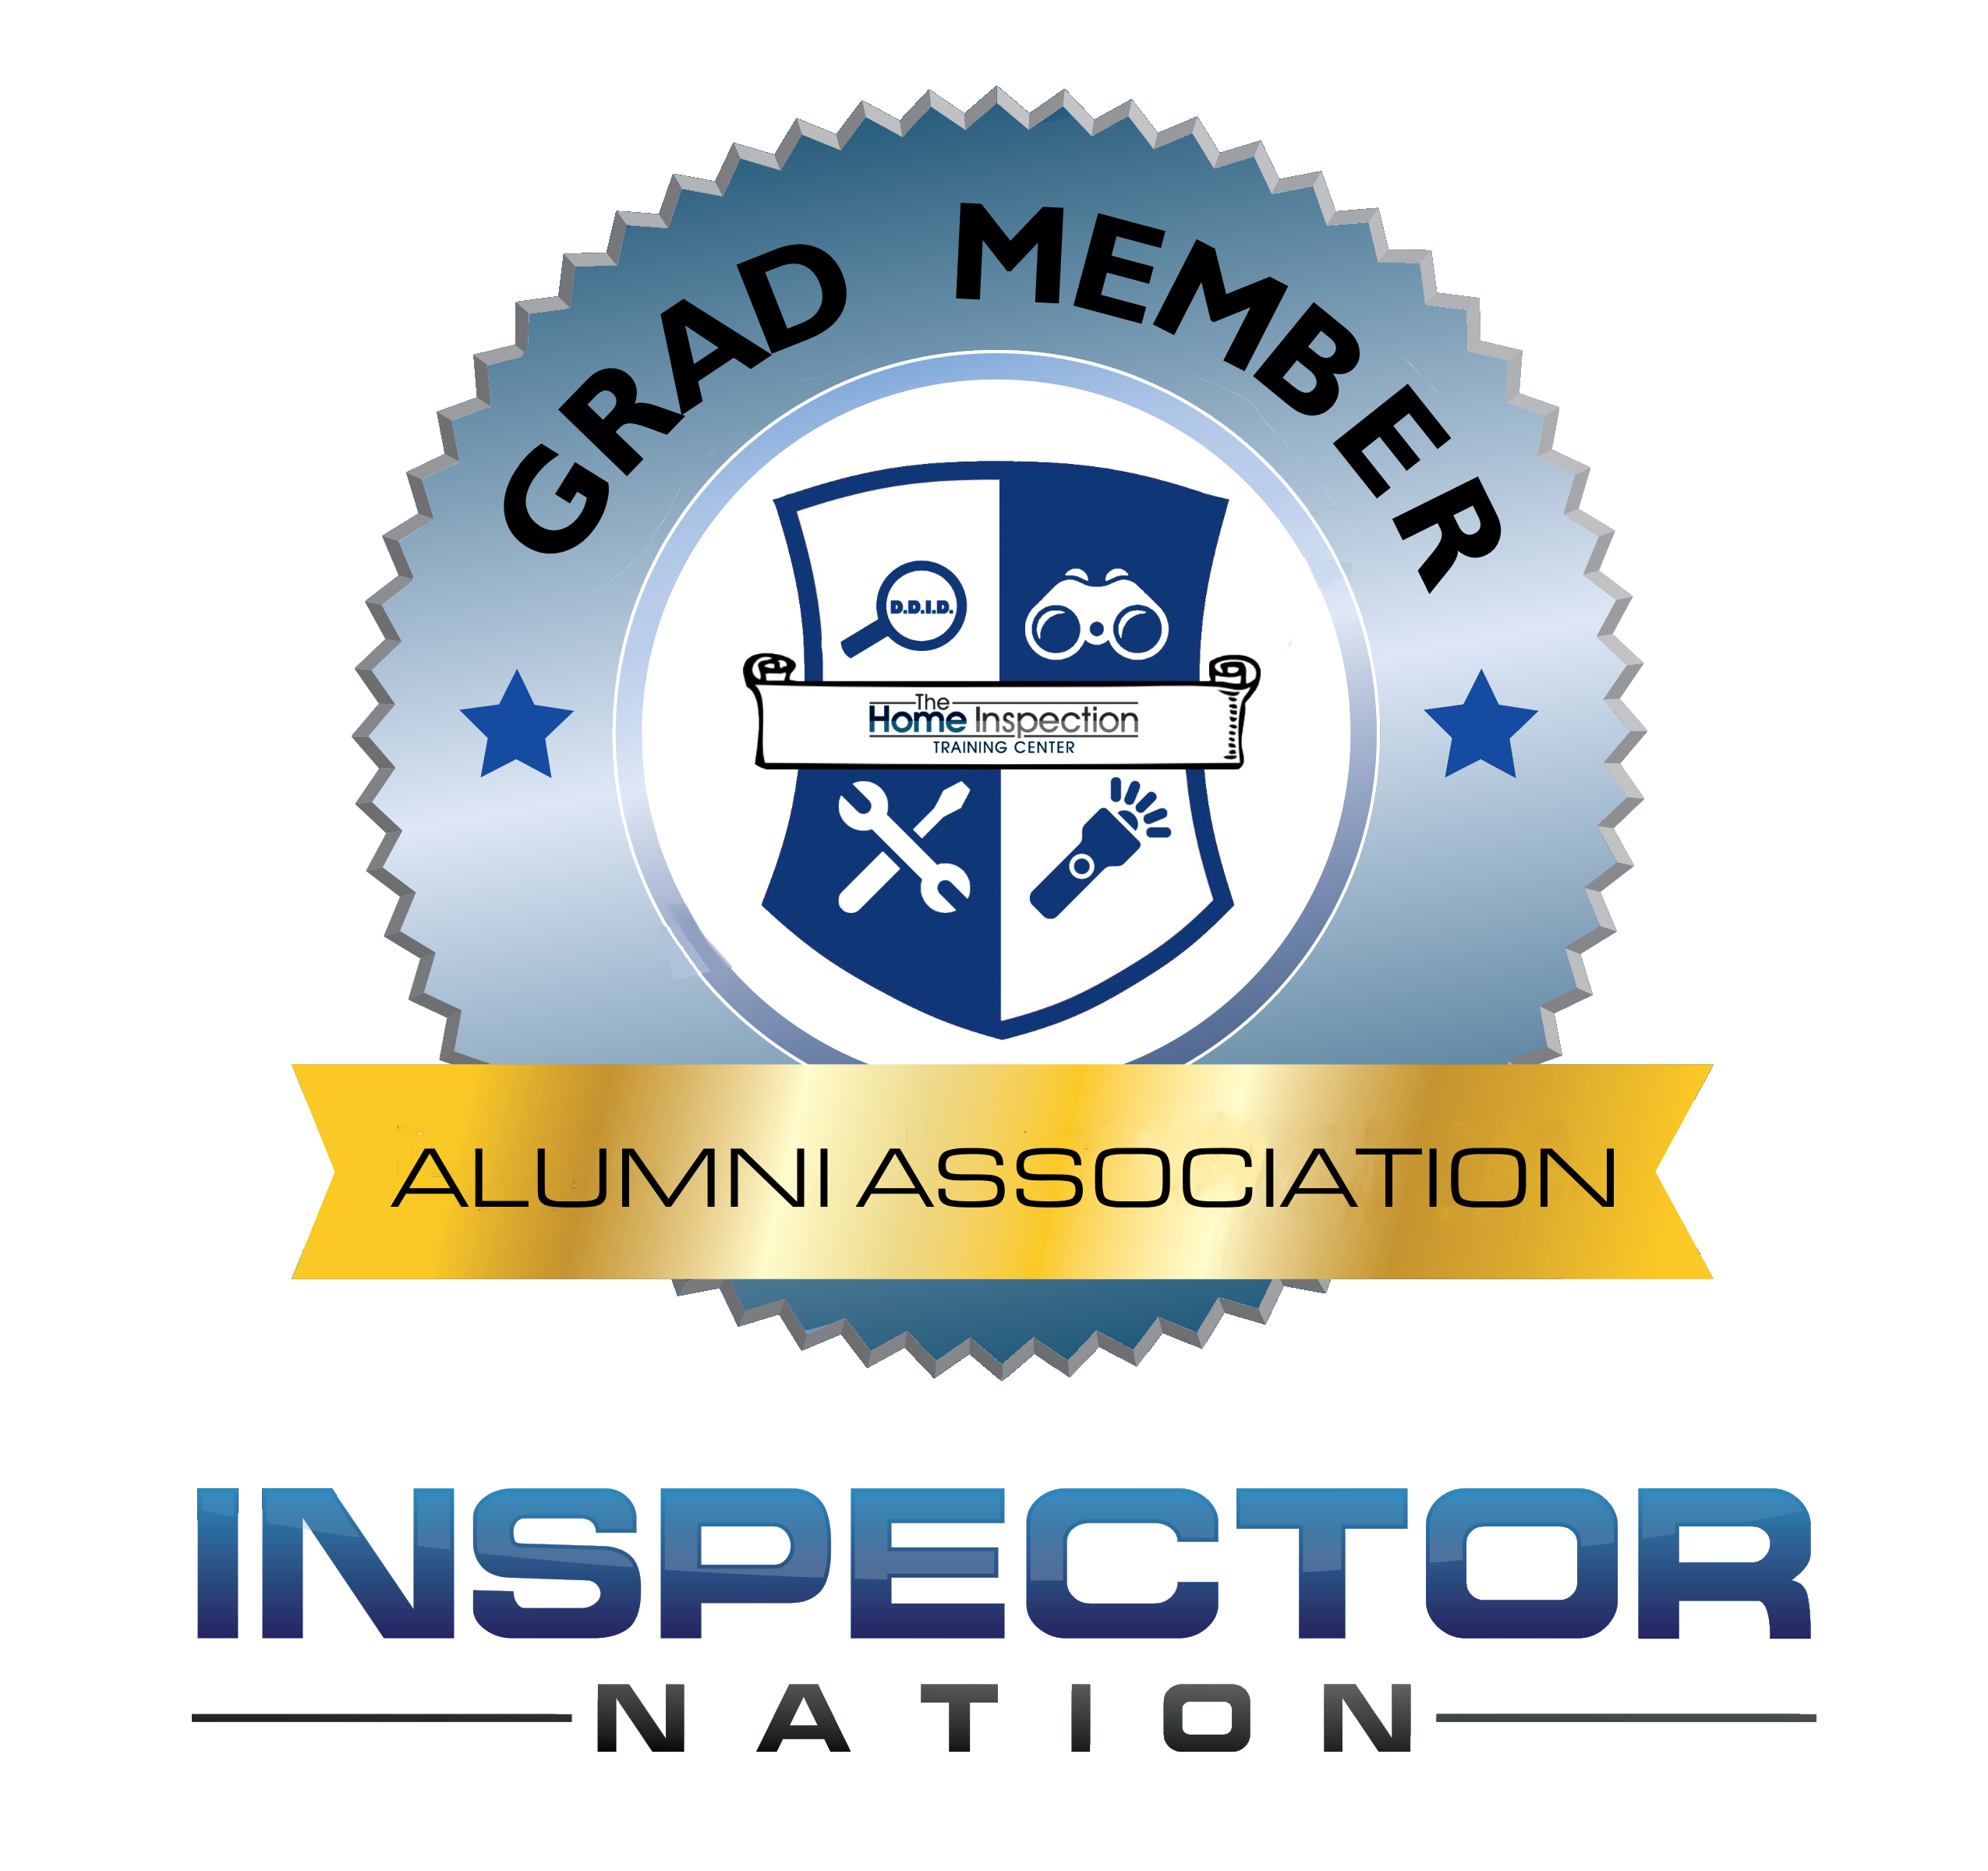 graduate of the home inspection training center (thitcenter) prelicensing education program  inspector nation certified home inspector 